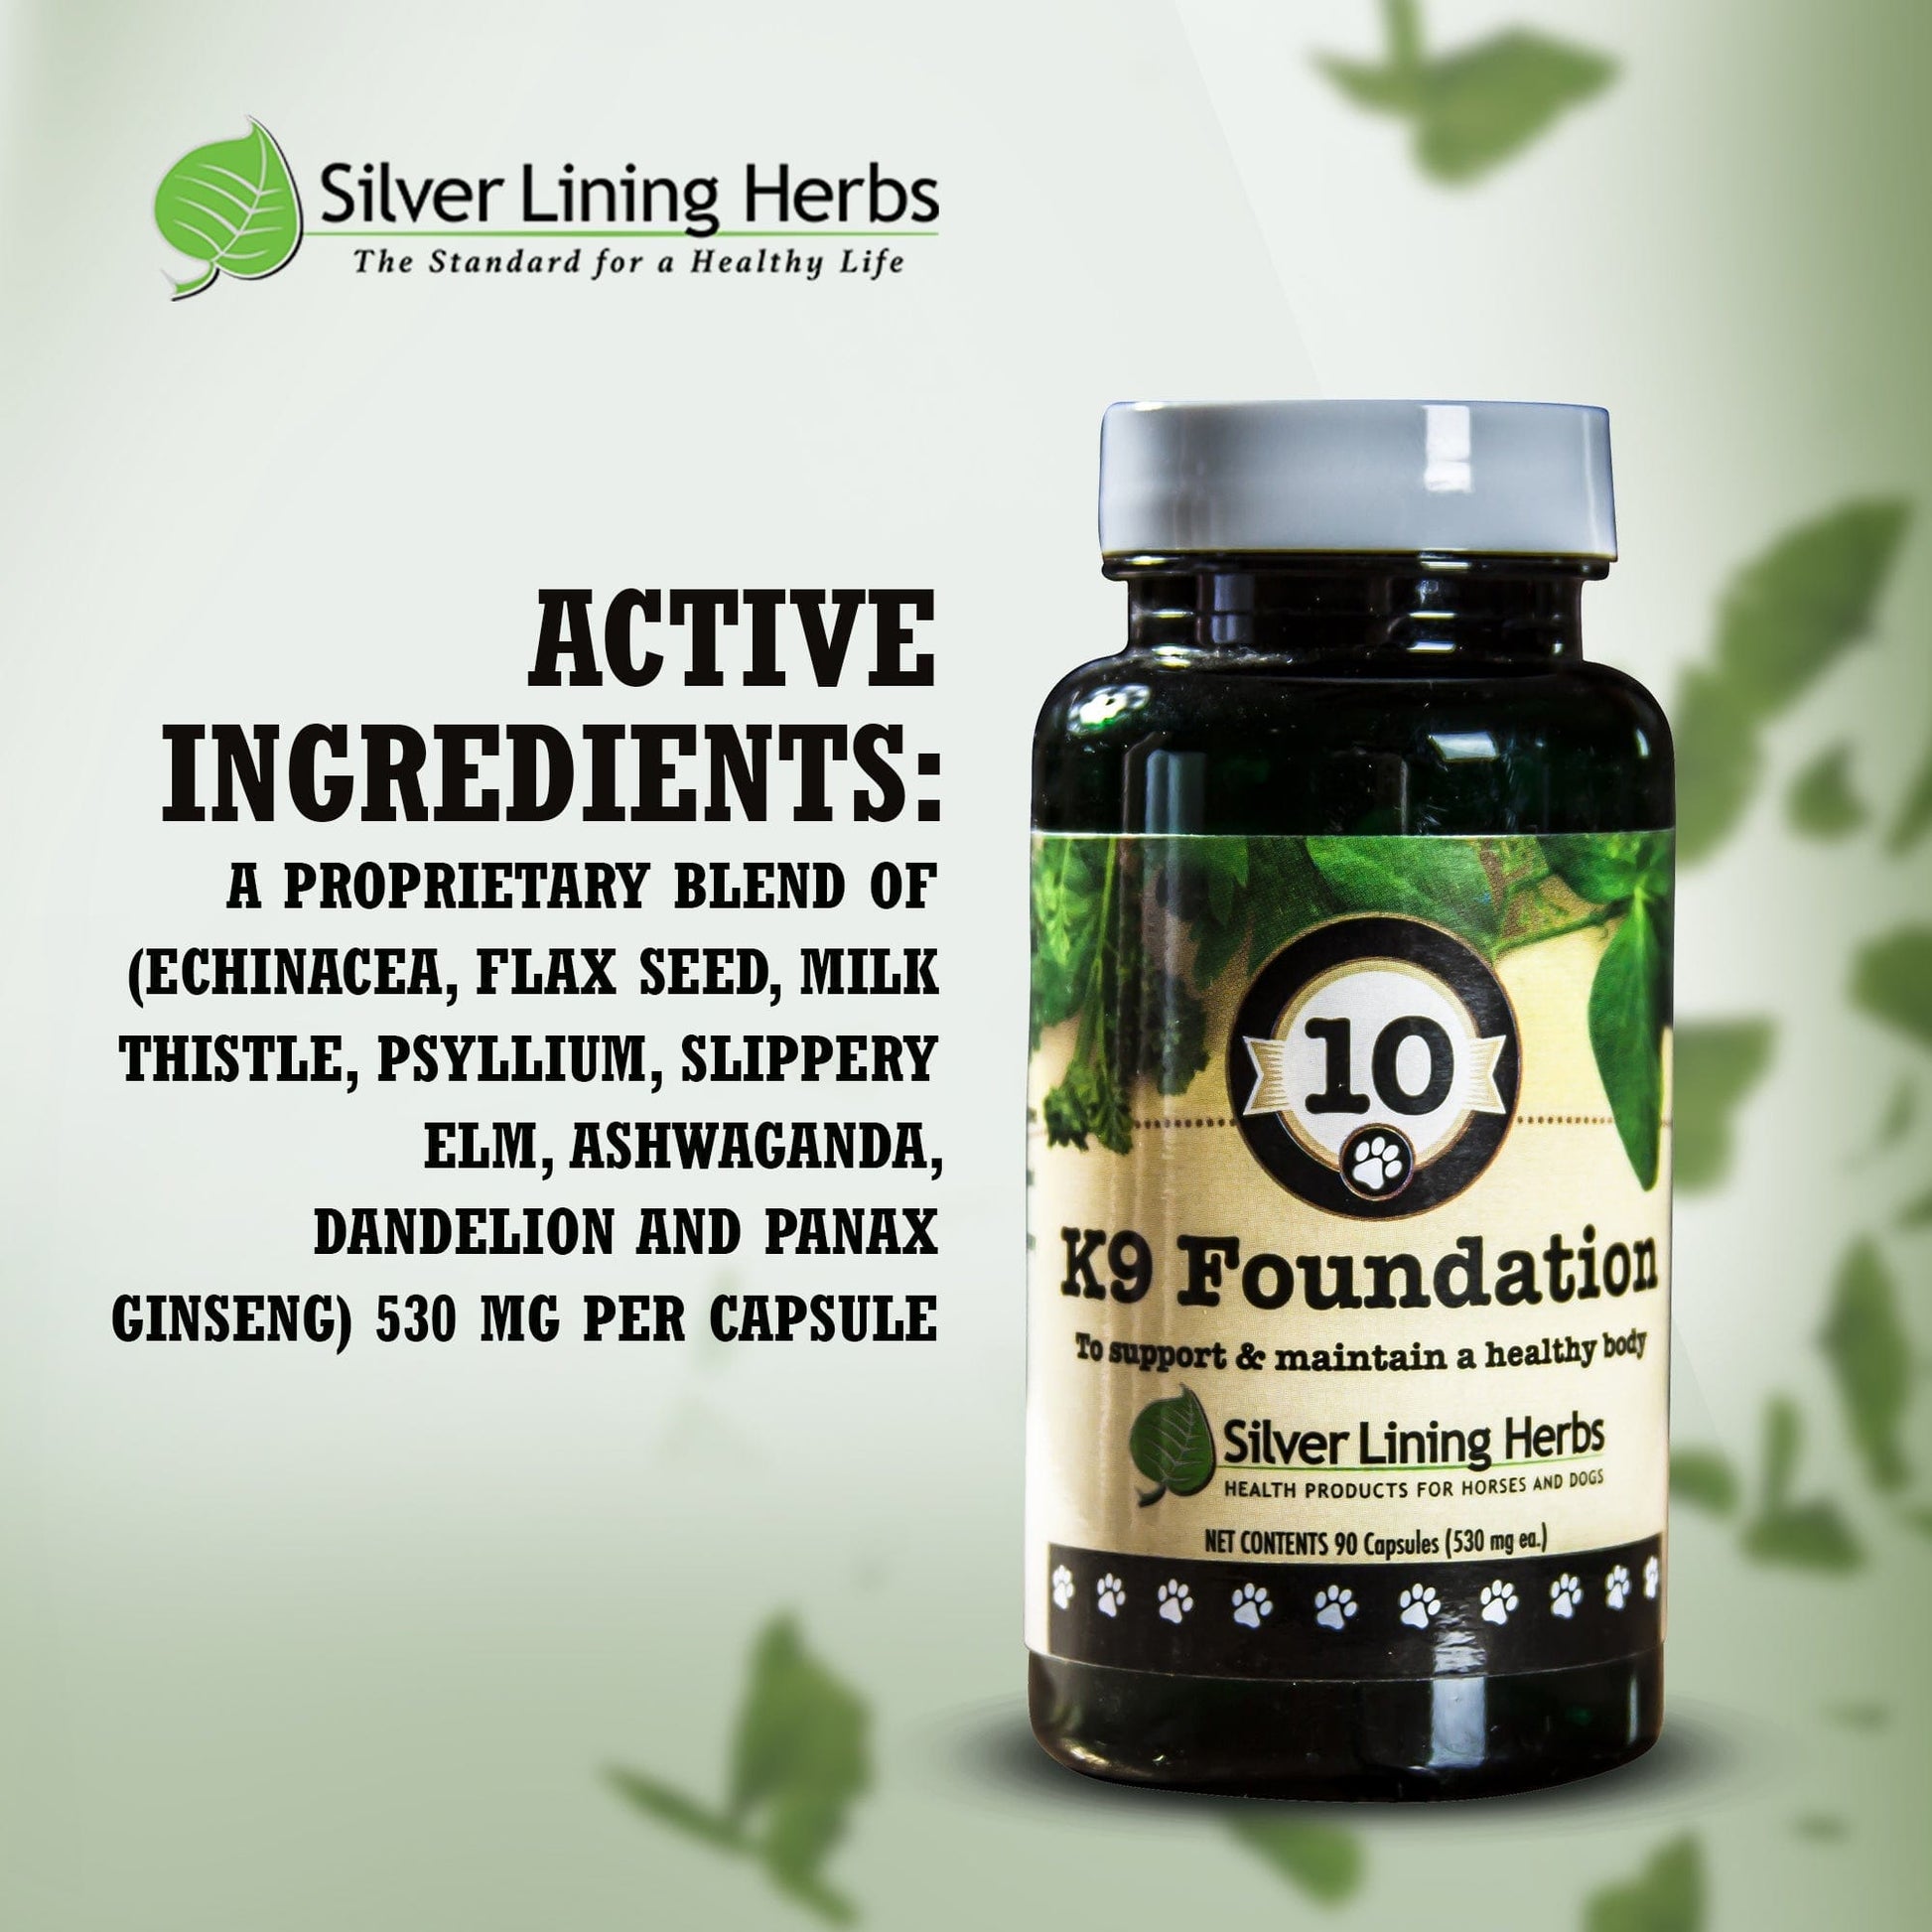 10 Foundation for Dogs - Silver Lining Herbs